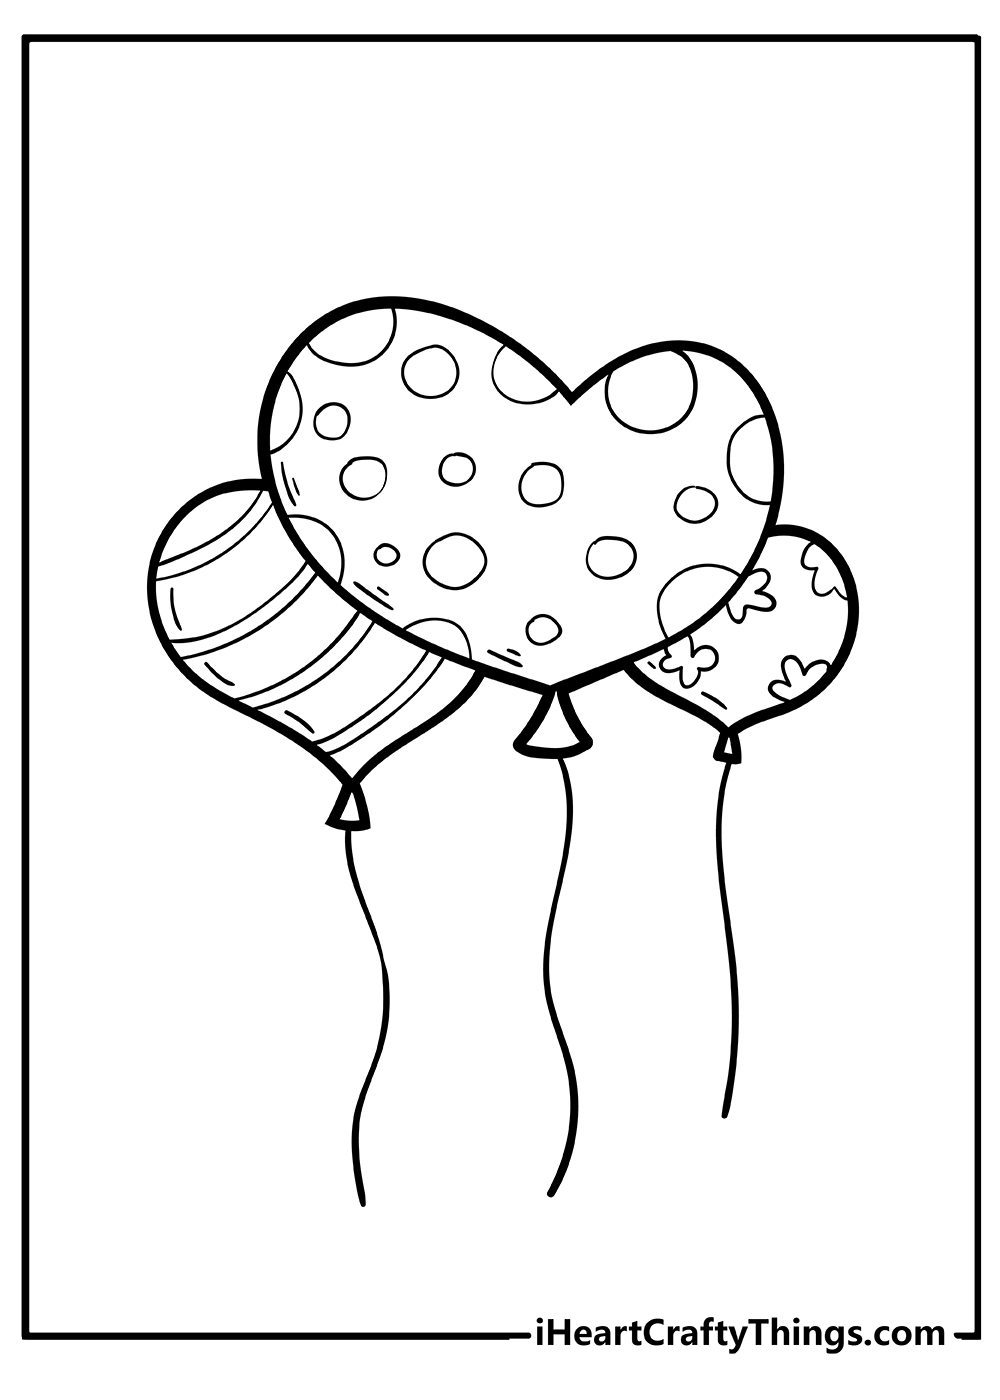 Balloons Coloring Pages for kids free download